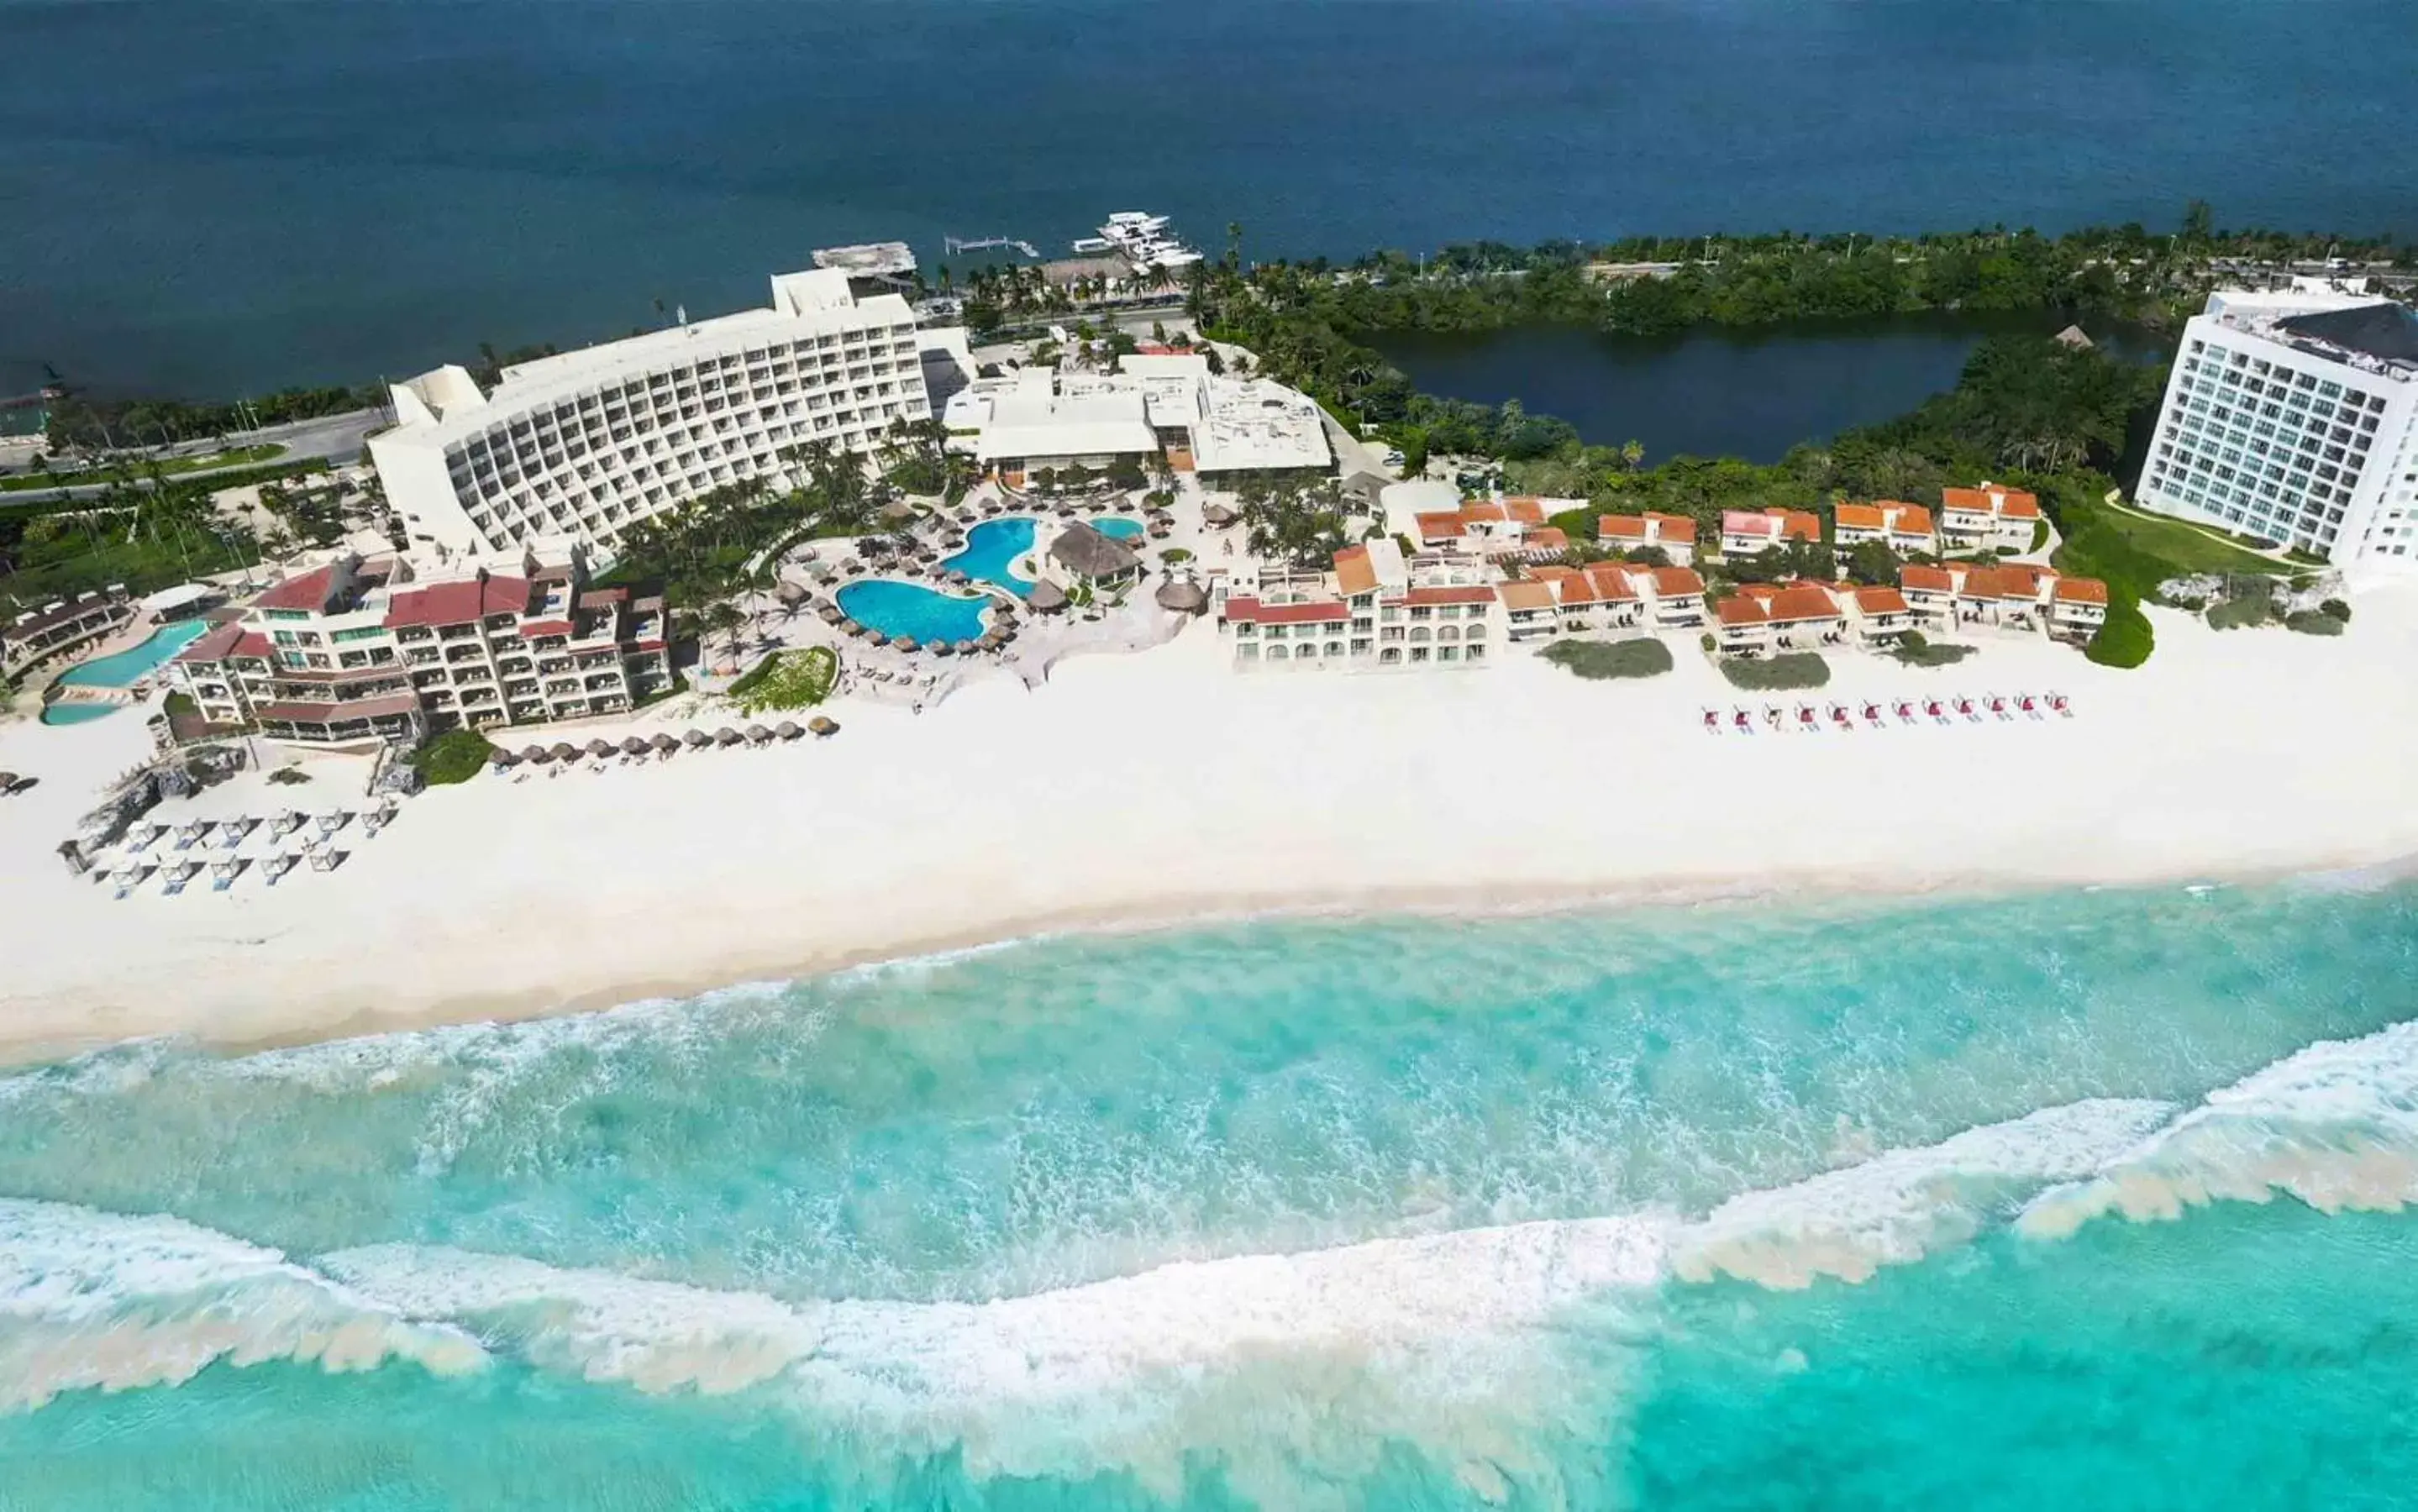 Property building, Bird's-eye View in Grand Park Royal Cancun